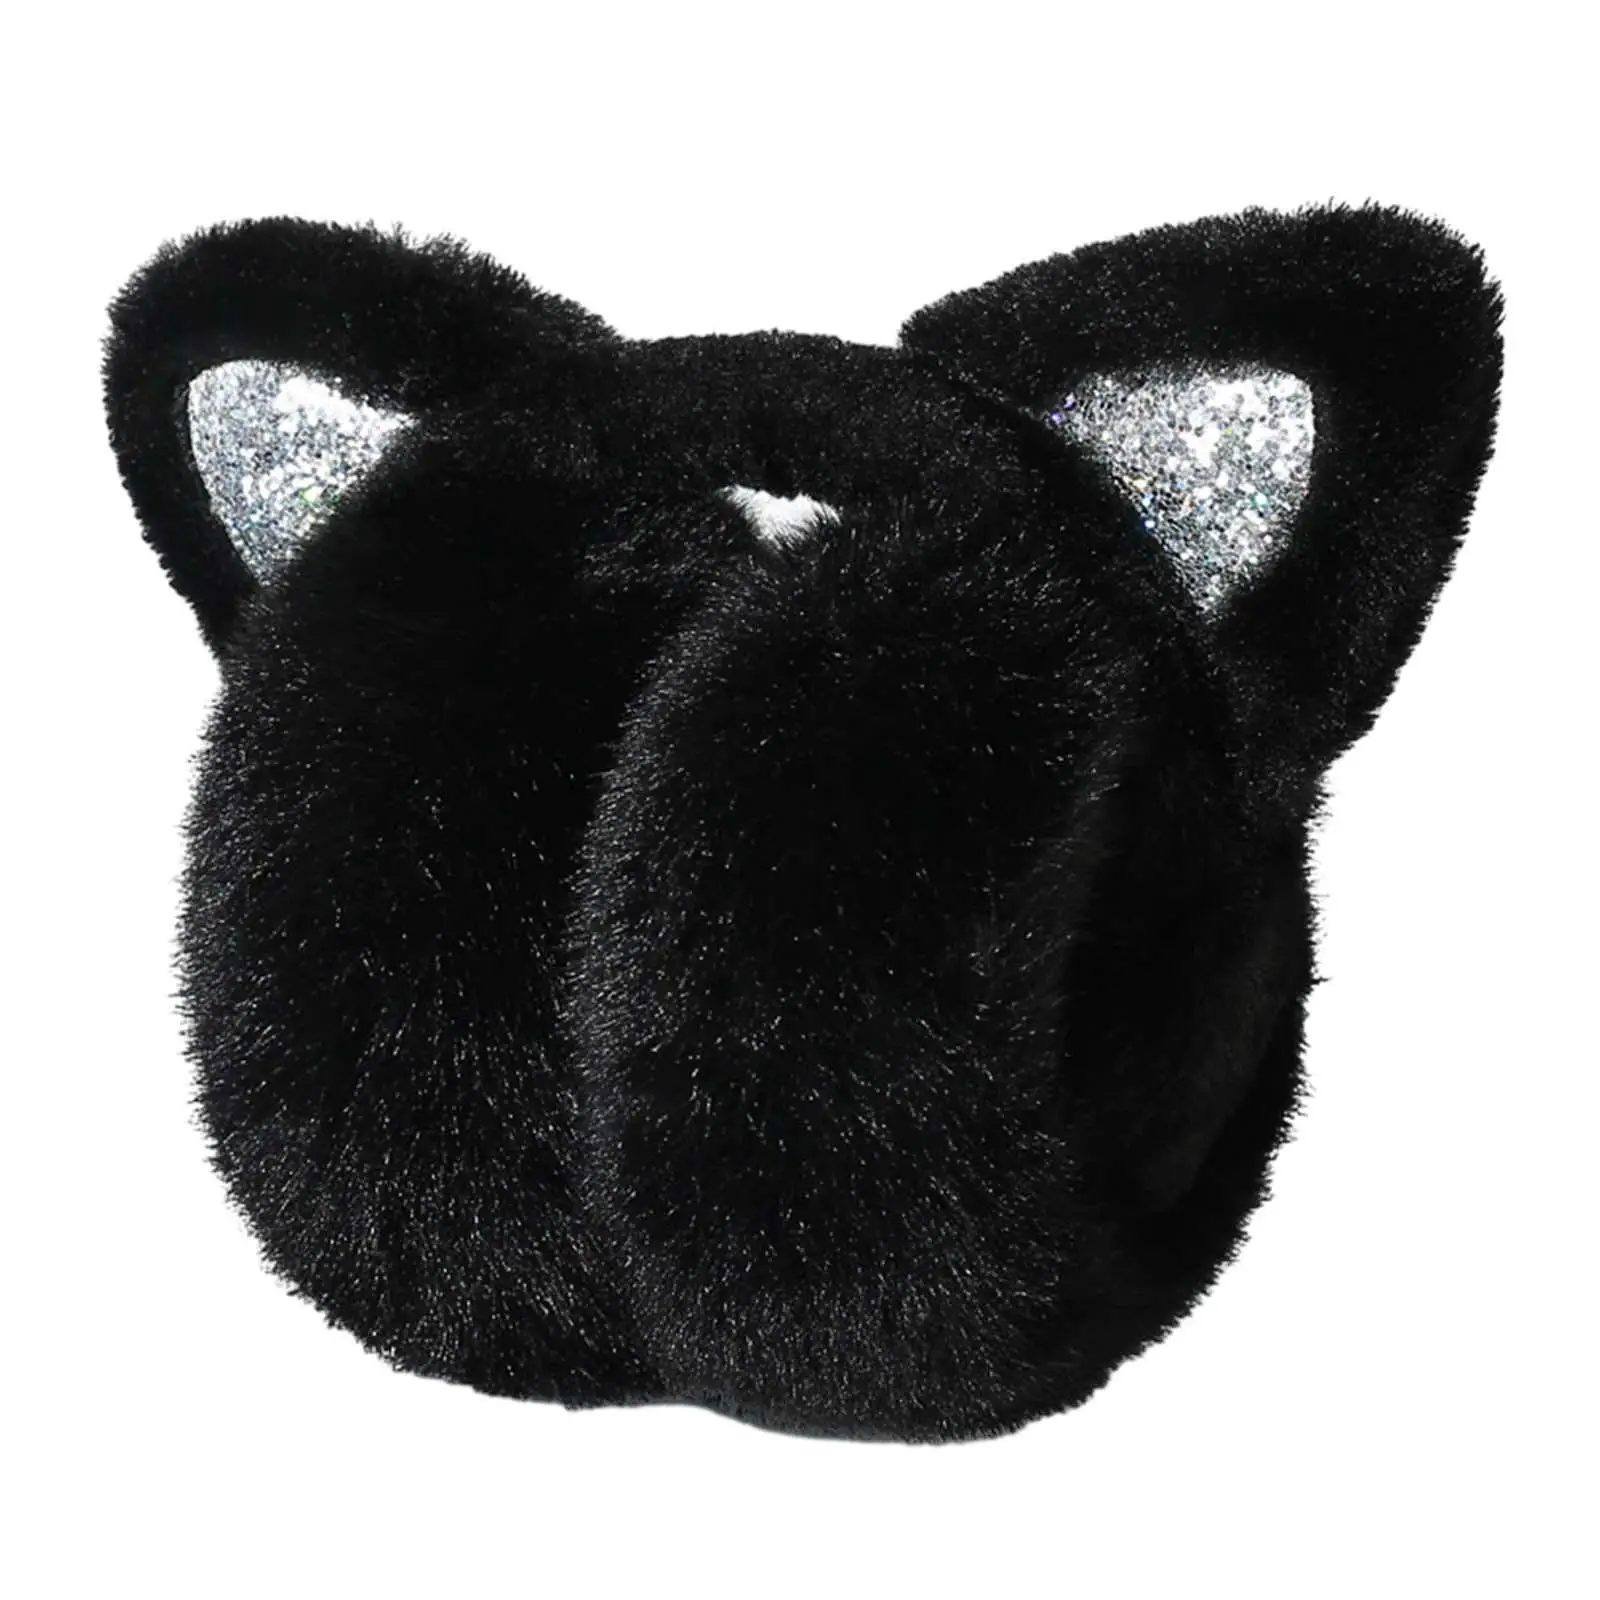 Ear Warmers Polyester Folded Comfortable Winter Ear Muffs Earmuffs for Skating Traveling Outdoor Activities Riding Cold Weather